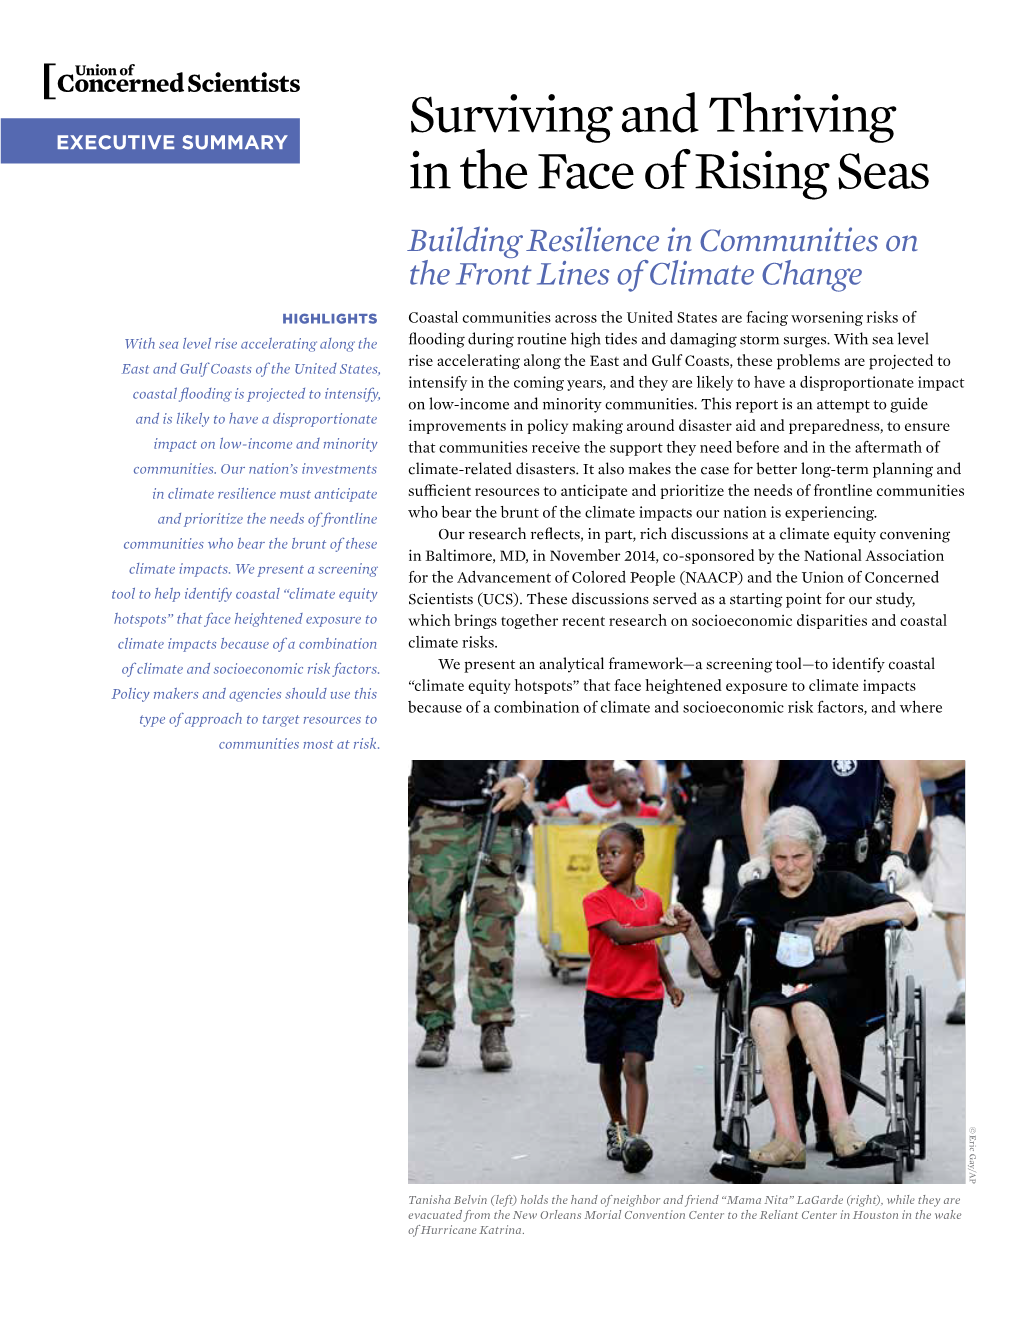 Surviving and Thriving in the Face of Rising Seas (2015) -- Executive